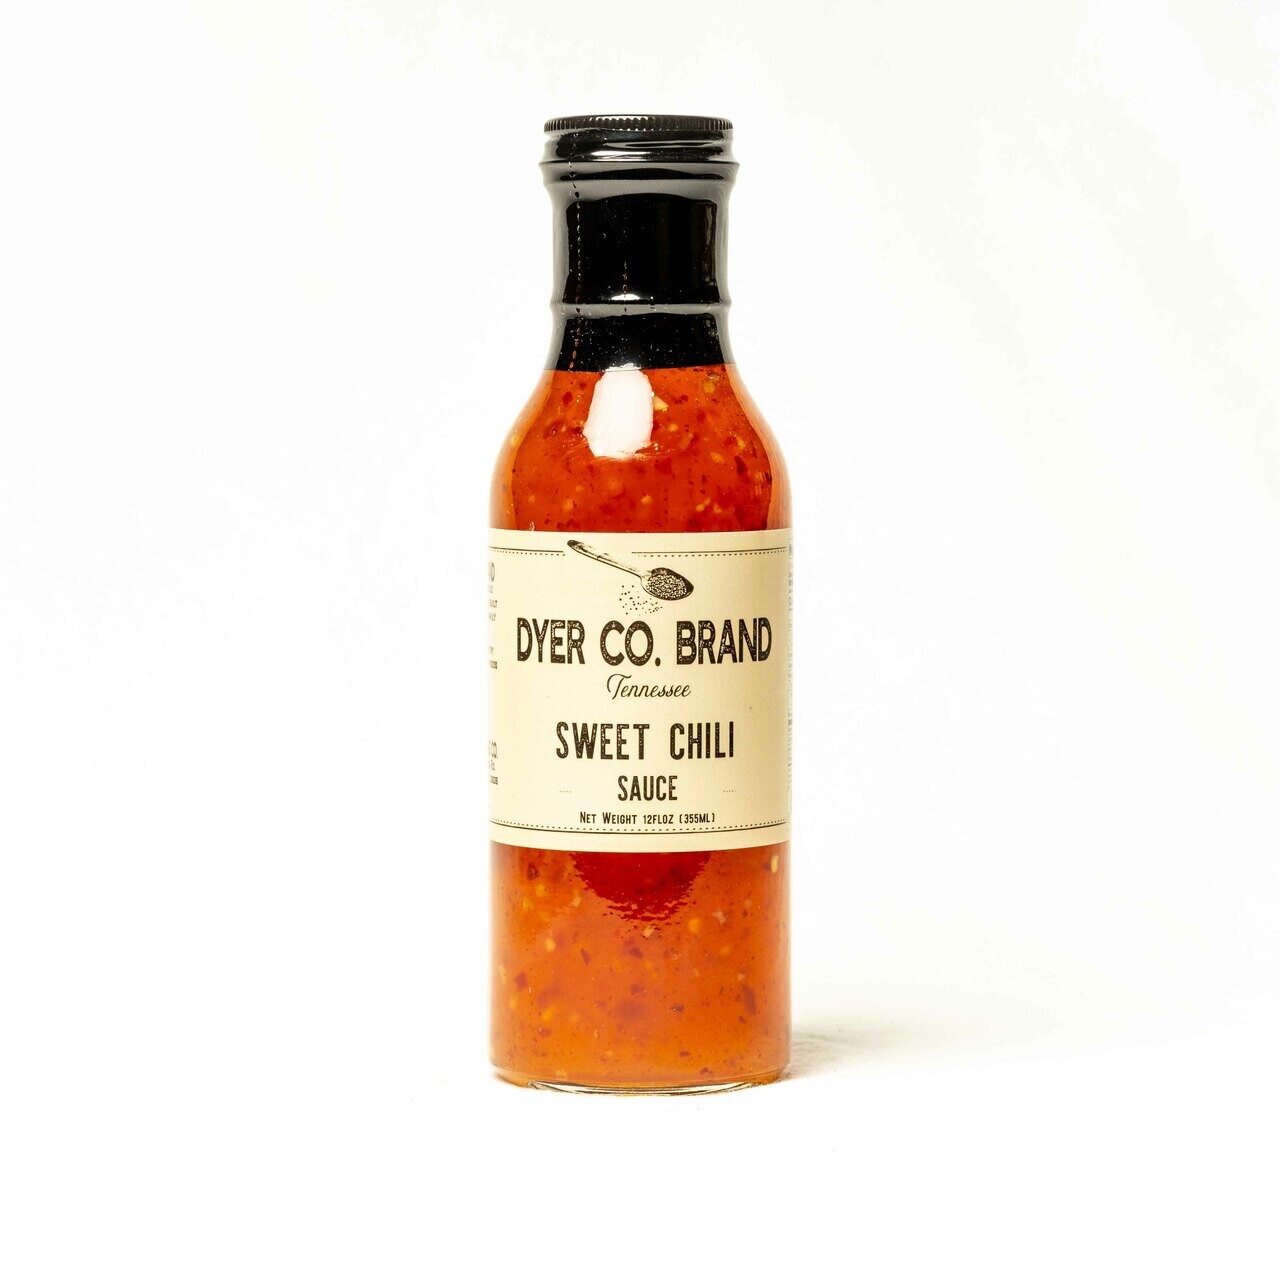 Dyer Co Brand Sweet Chili Sauce